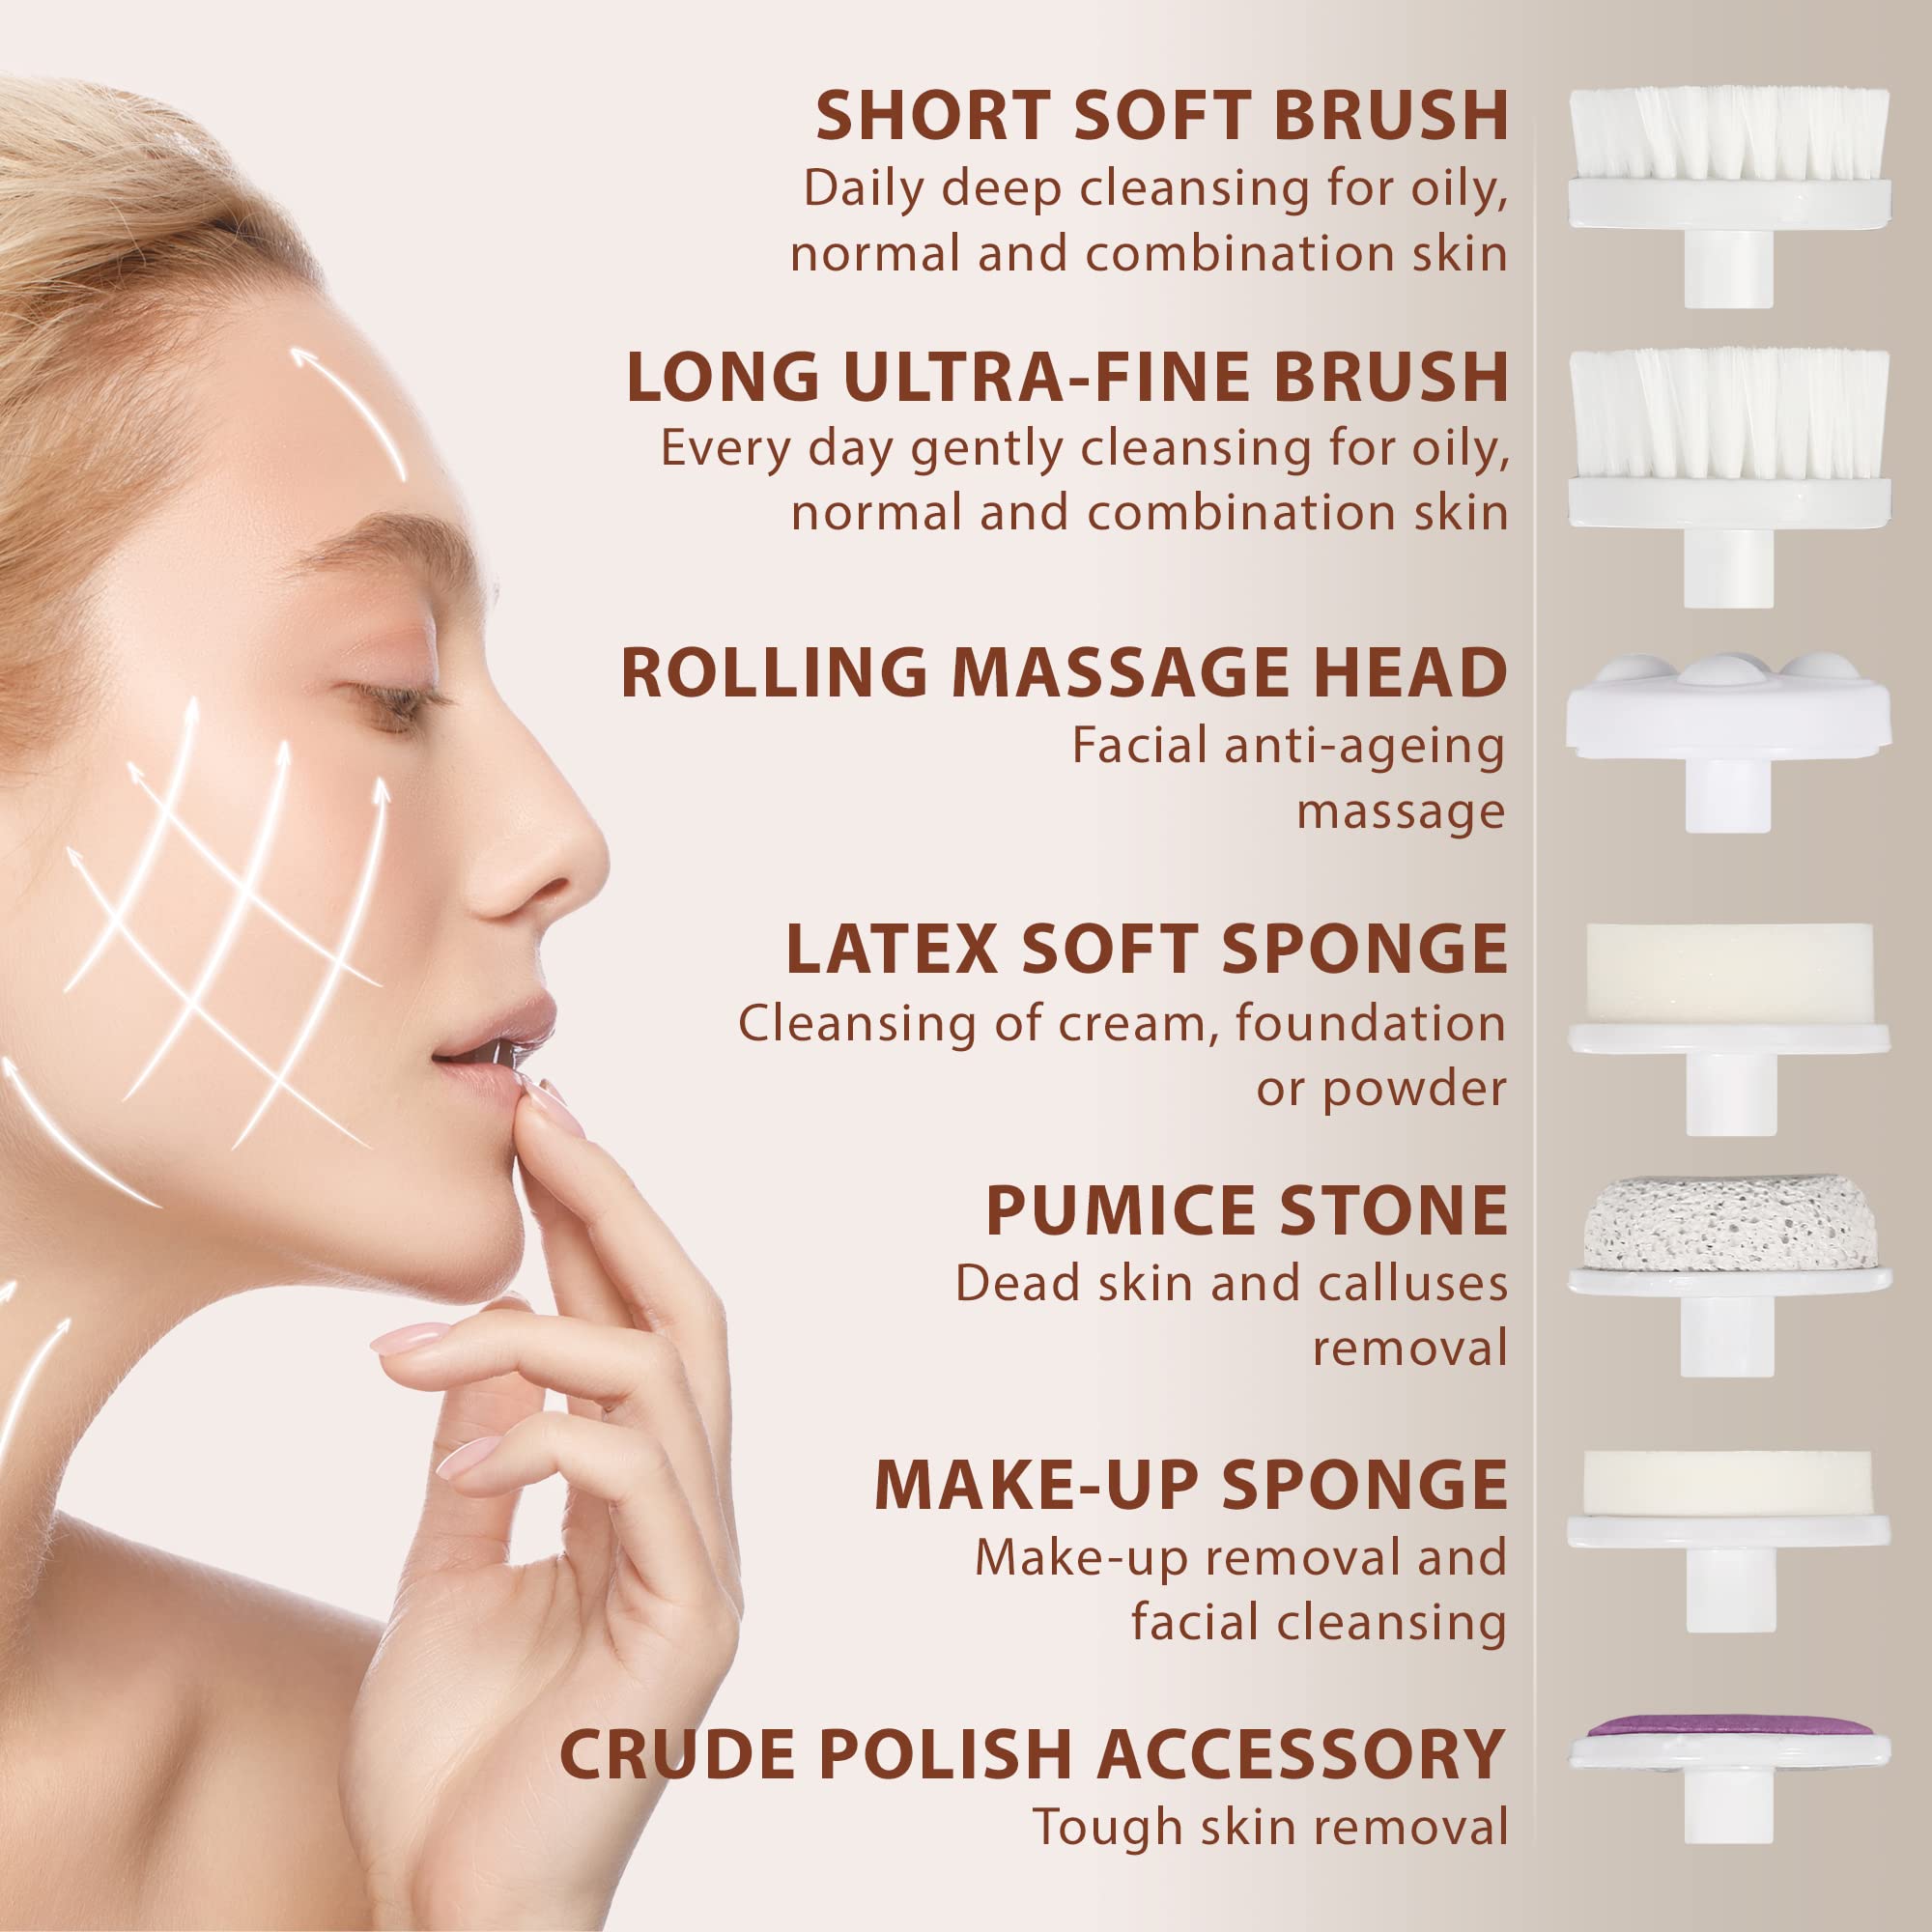 Need a Deep Facial Cleanse. Here are 10 Ways the PMD Beauty Clean Smart Device Can Transform Your Skin Care Routine